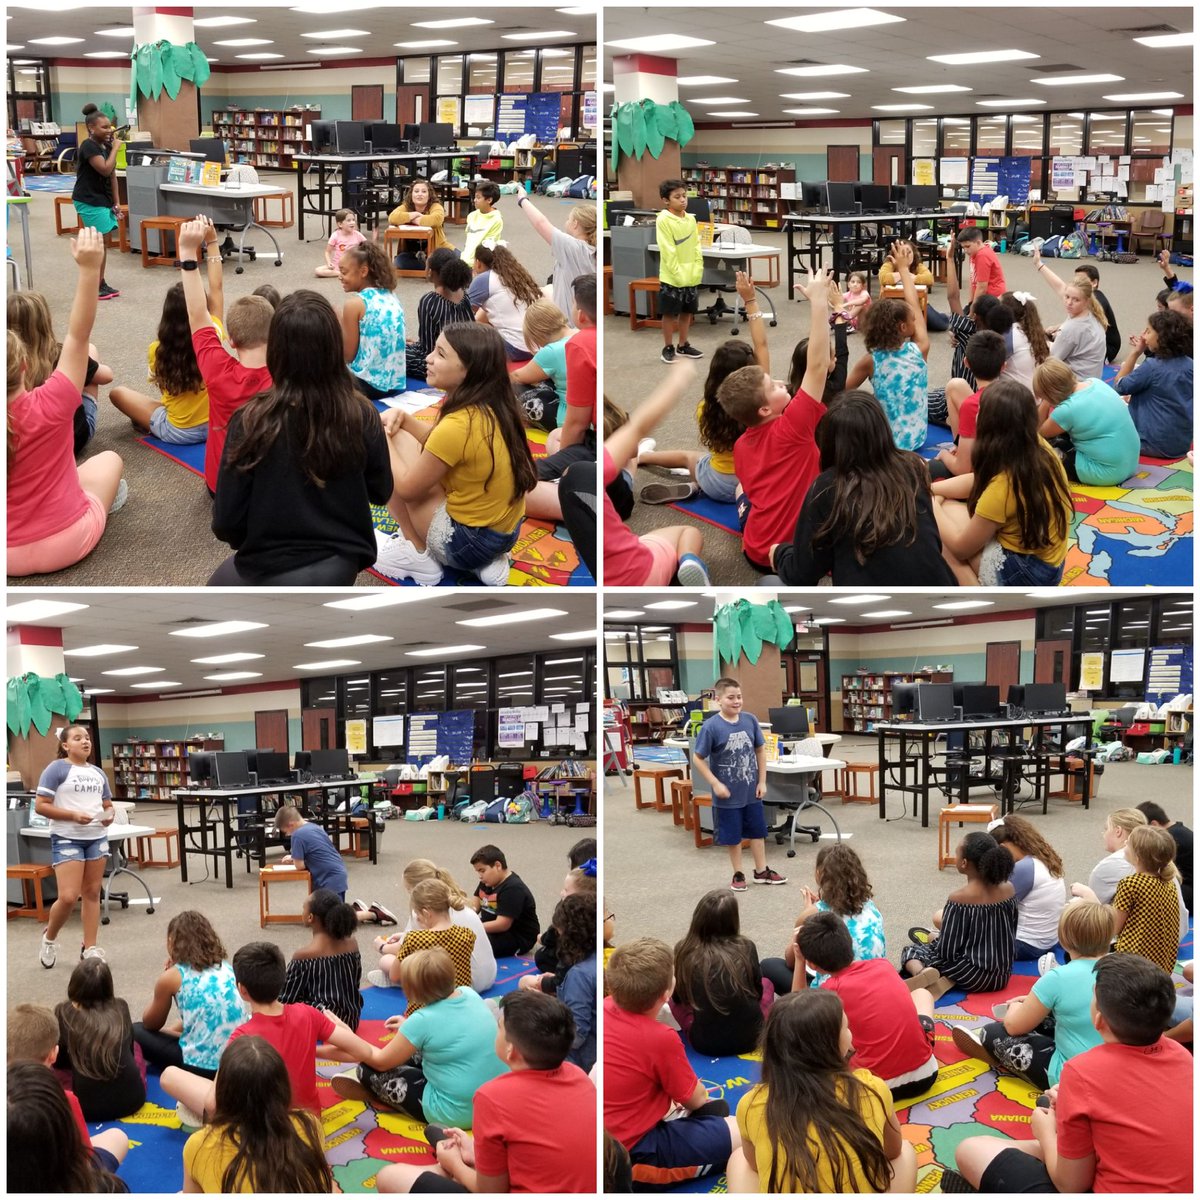 Potential #LSEStuCo #AGENTS showed their #POG competencies of responsibility, leadership & collaboration, creative innovation and communication with some awesome #SpeechPractice before the big day! @shgrimes4 @KathrynHenson #leopardspotting  #BeTheLight @HumbleISD_LSE